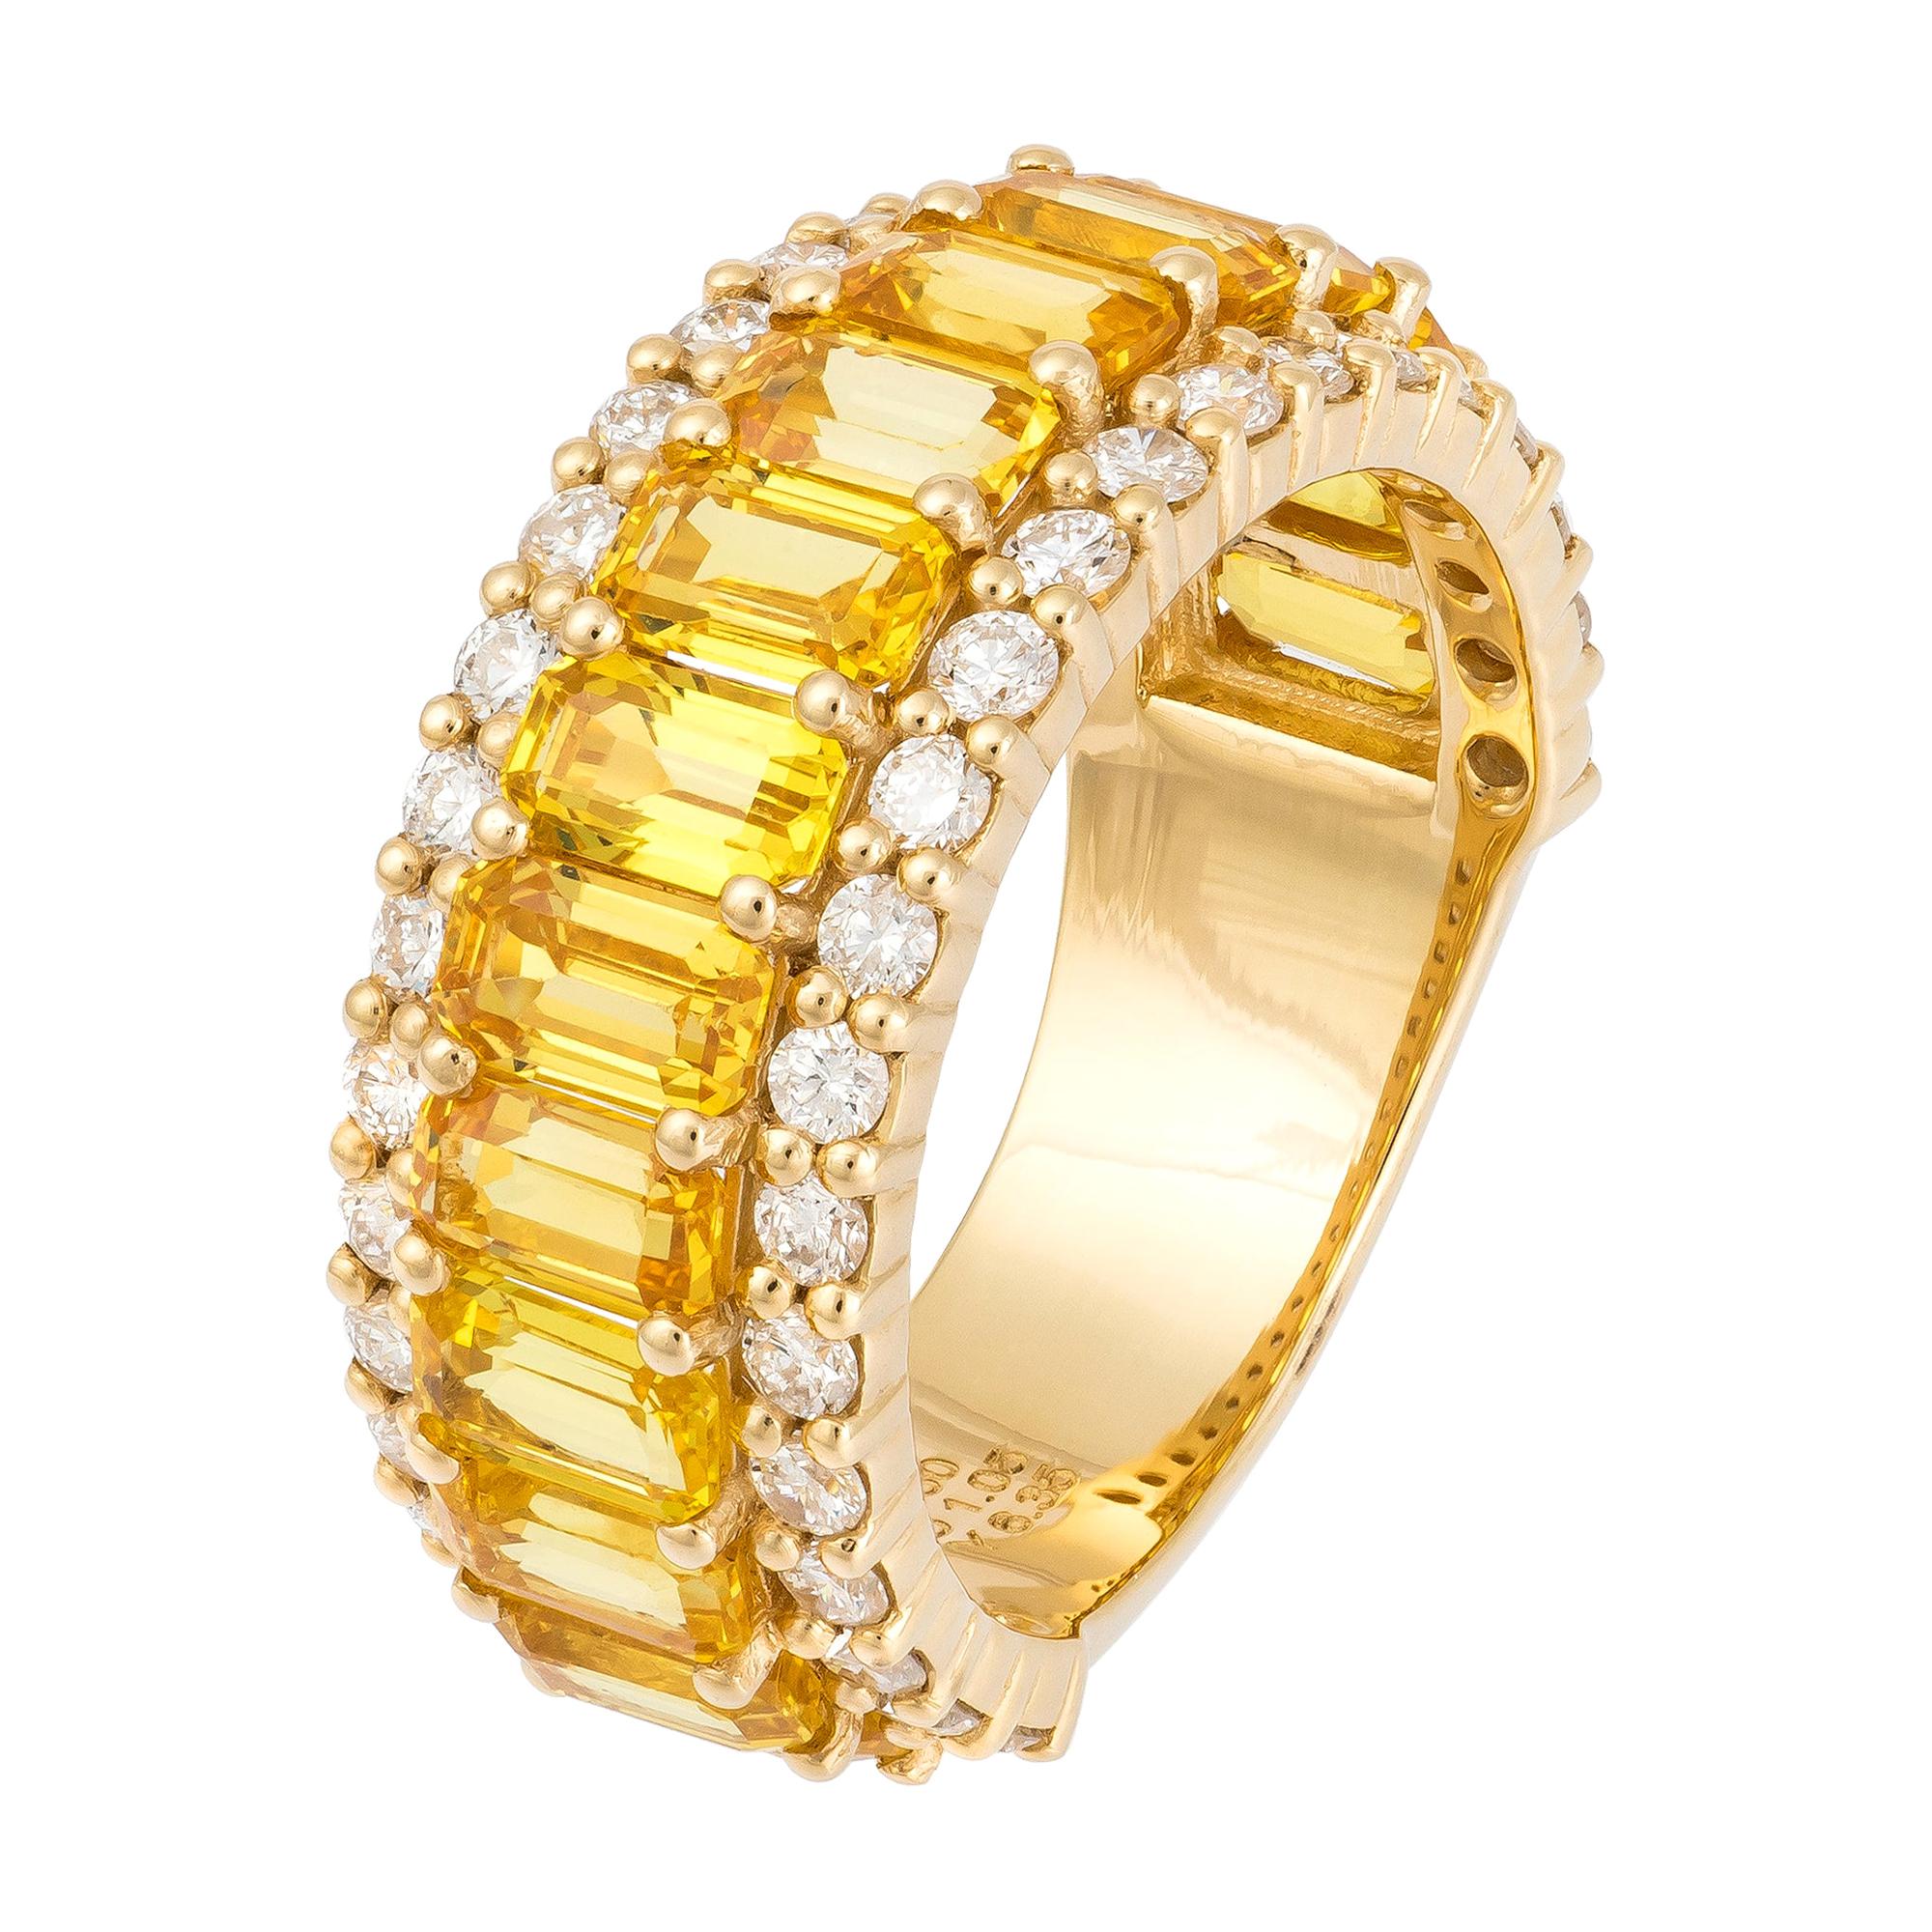 Spectacular Diamond Yellow Sapphire Yellow Gold 18k Ring for Her